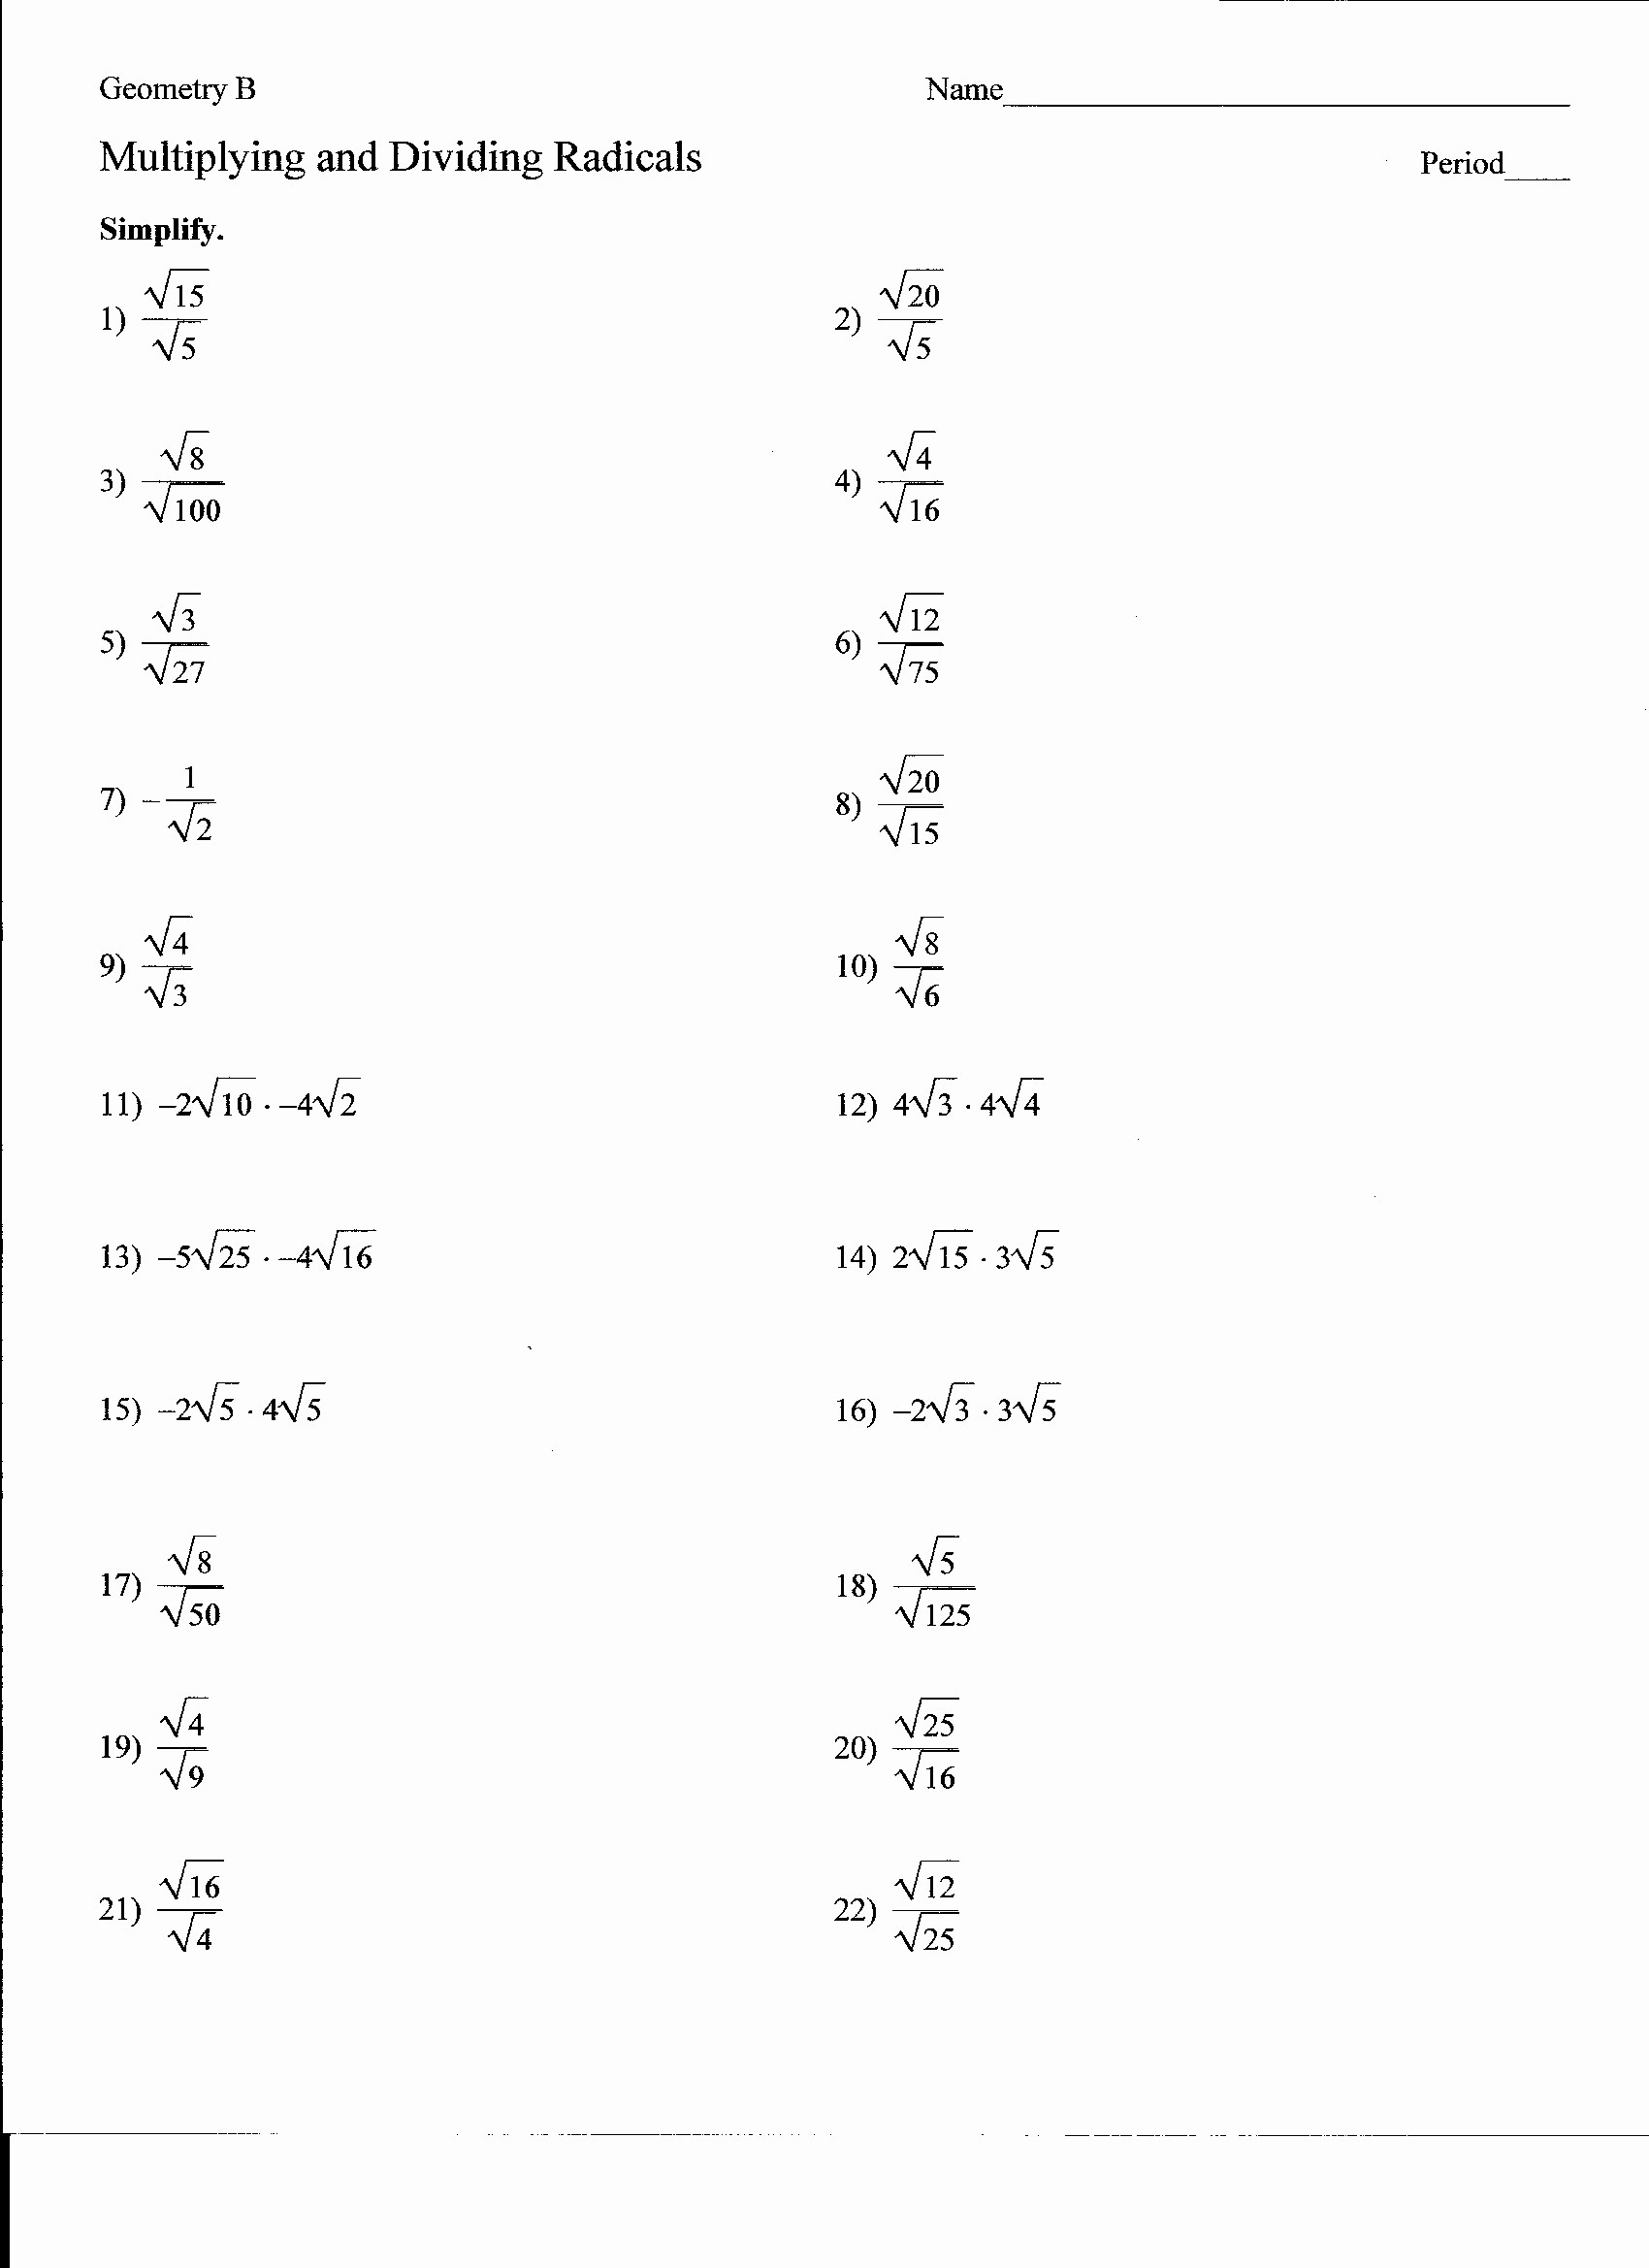 Multiplying Radical Expressions Worksheet Awesome 19 Best Of Multiplying and Dividing Radicals